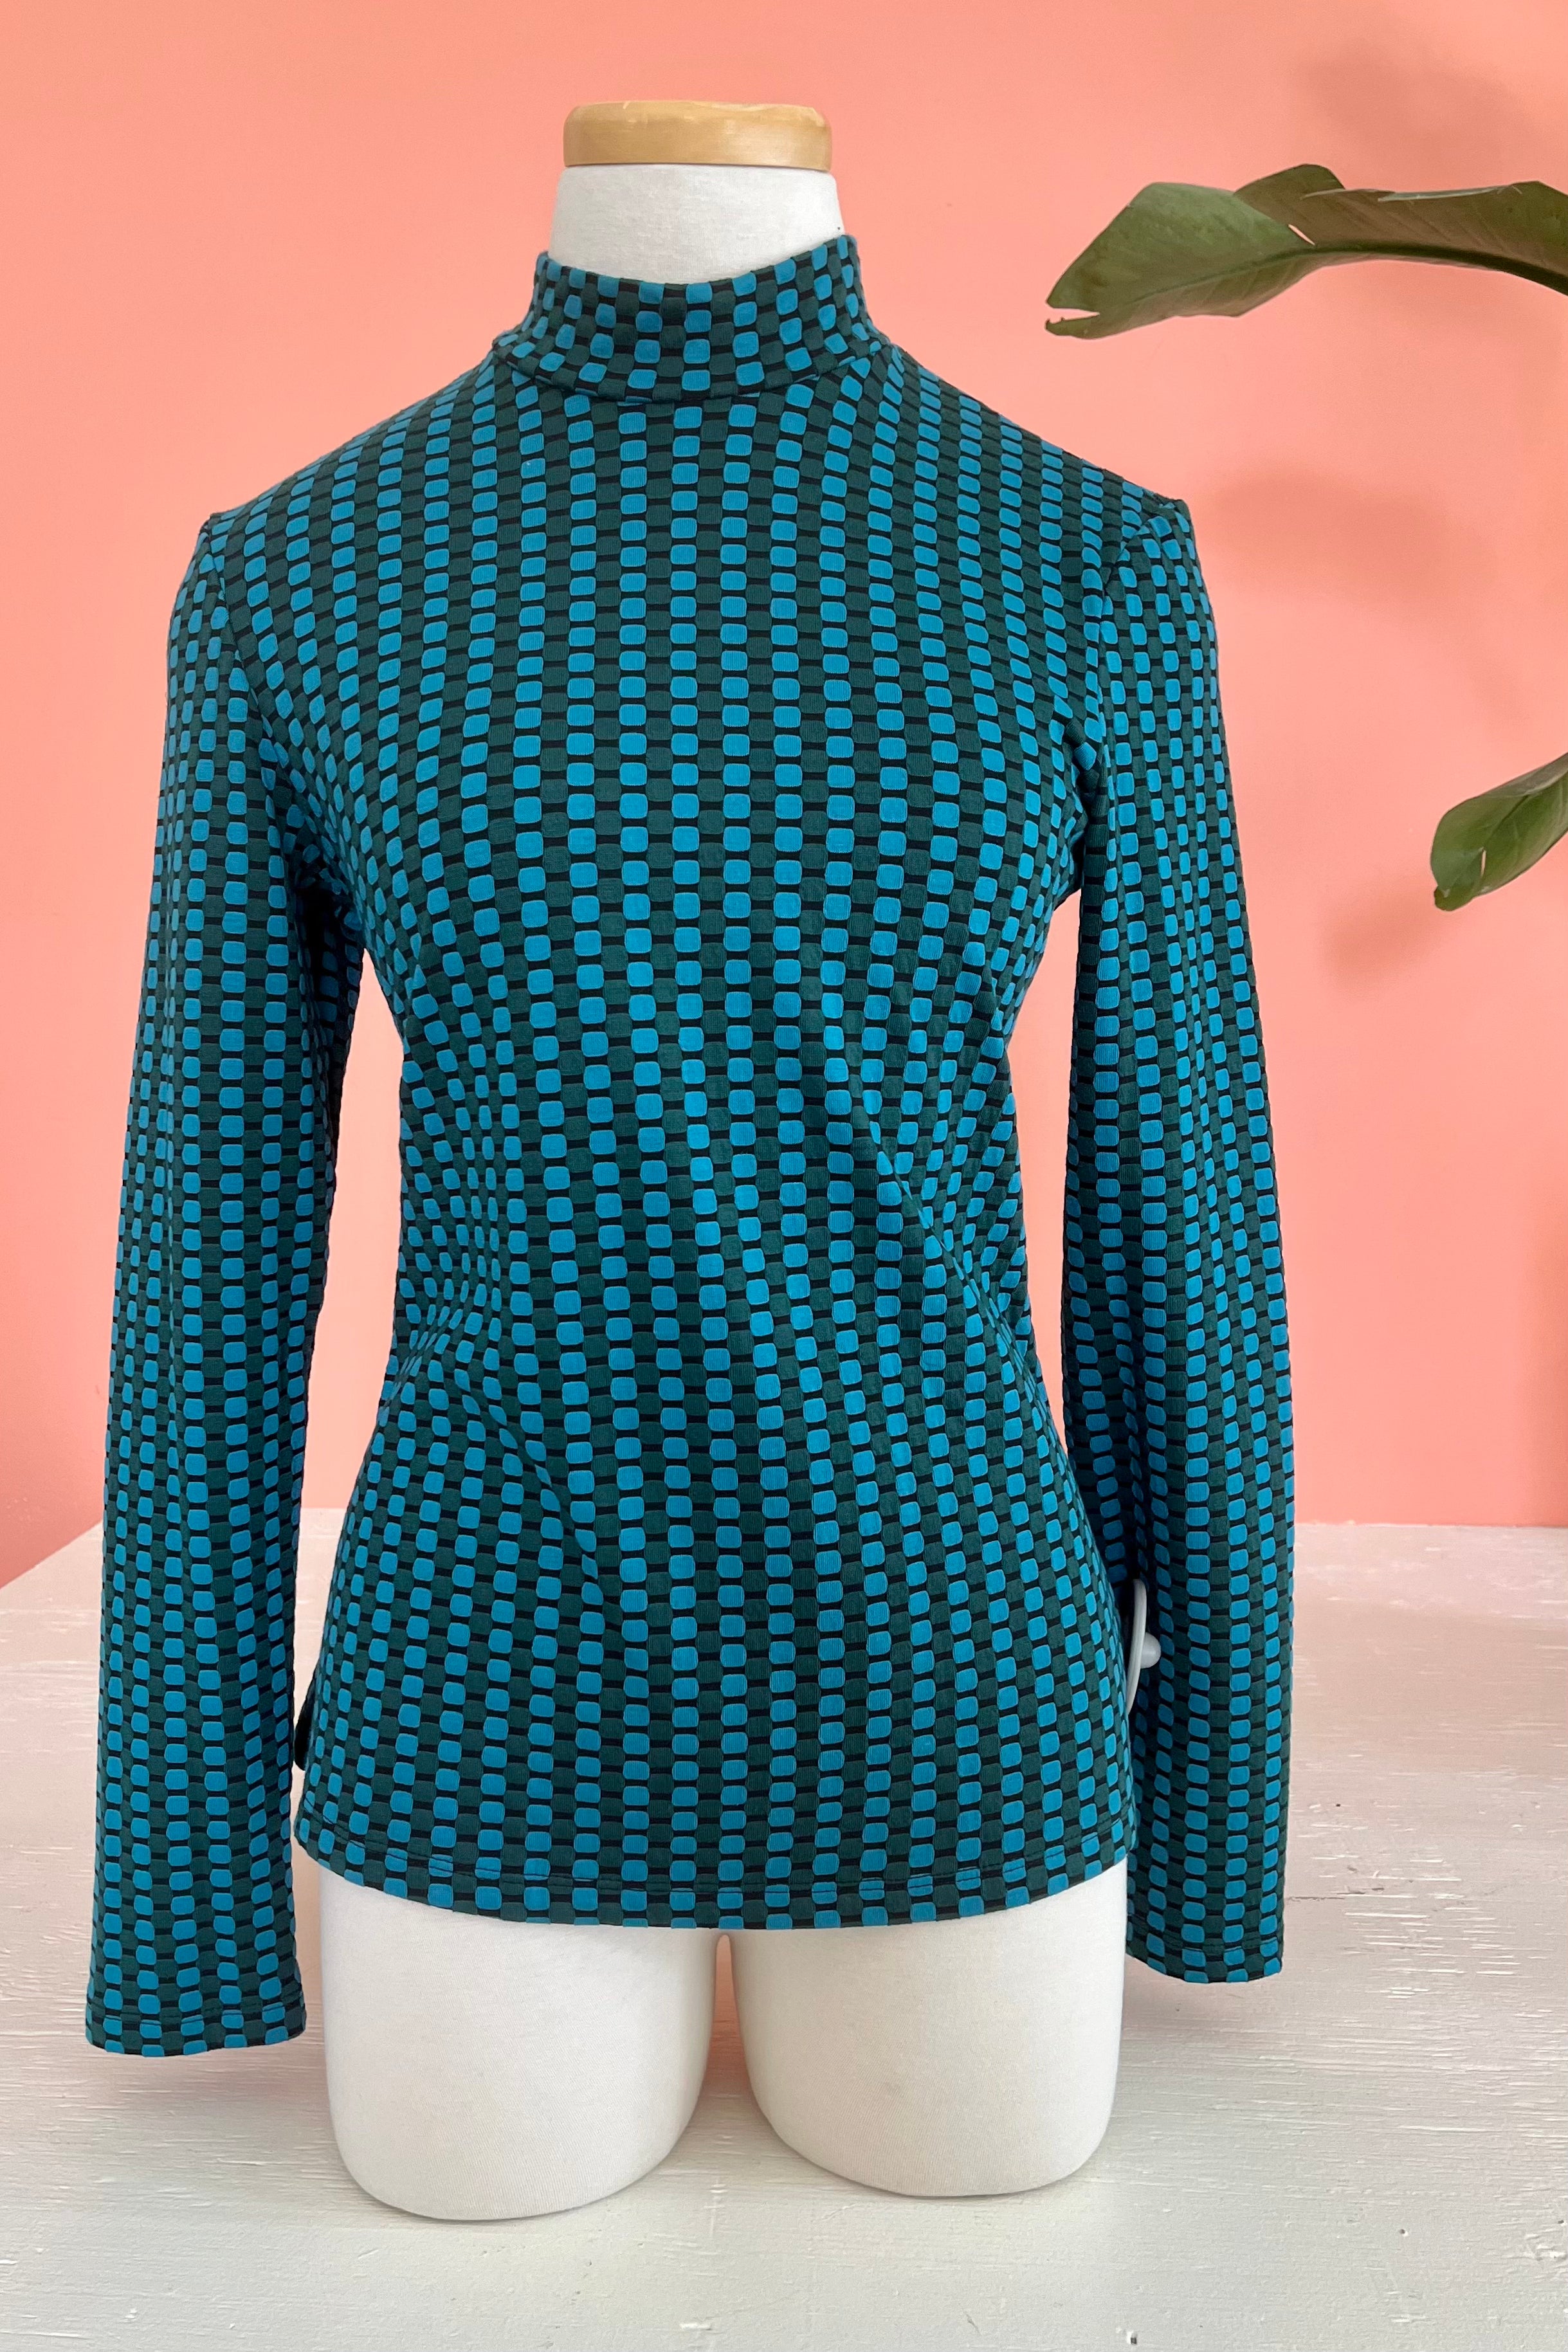 Paola Mock Top by Luc Fontaine, Turquoise, textured and patterned fabric, mock turtleneck, long sleeves, sizes 4-16, made in Canada